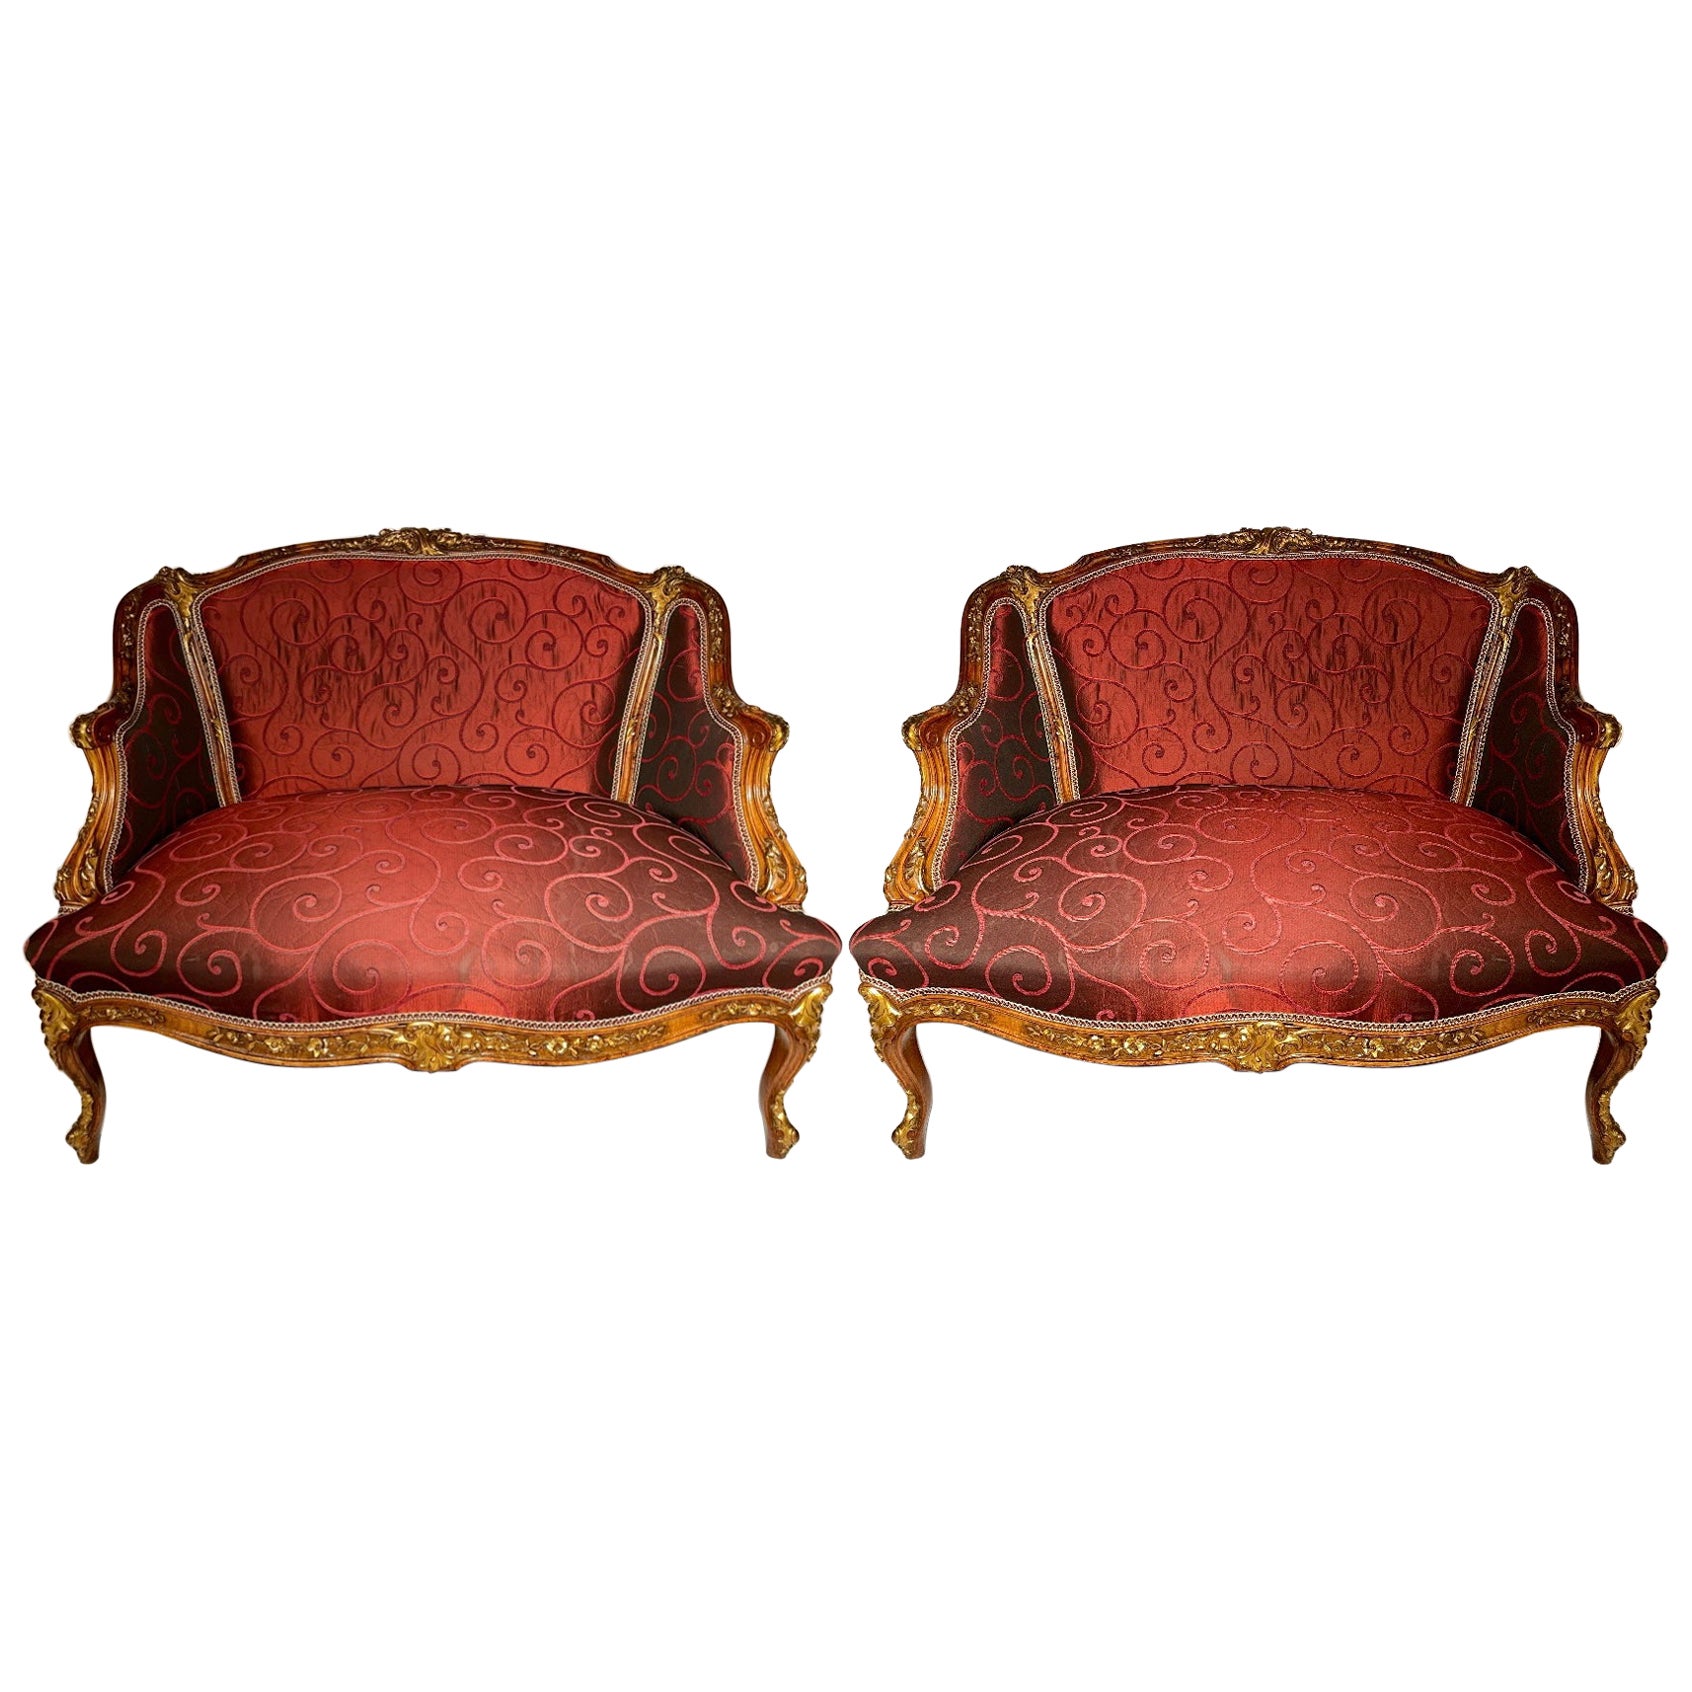 Pair Antique French Carved Walnut Bergères Armchairs, Circa 1880